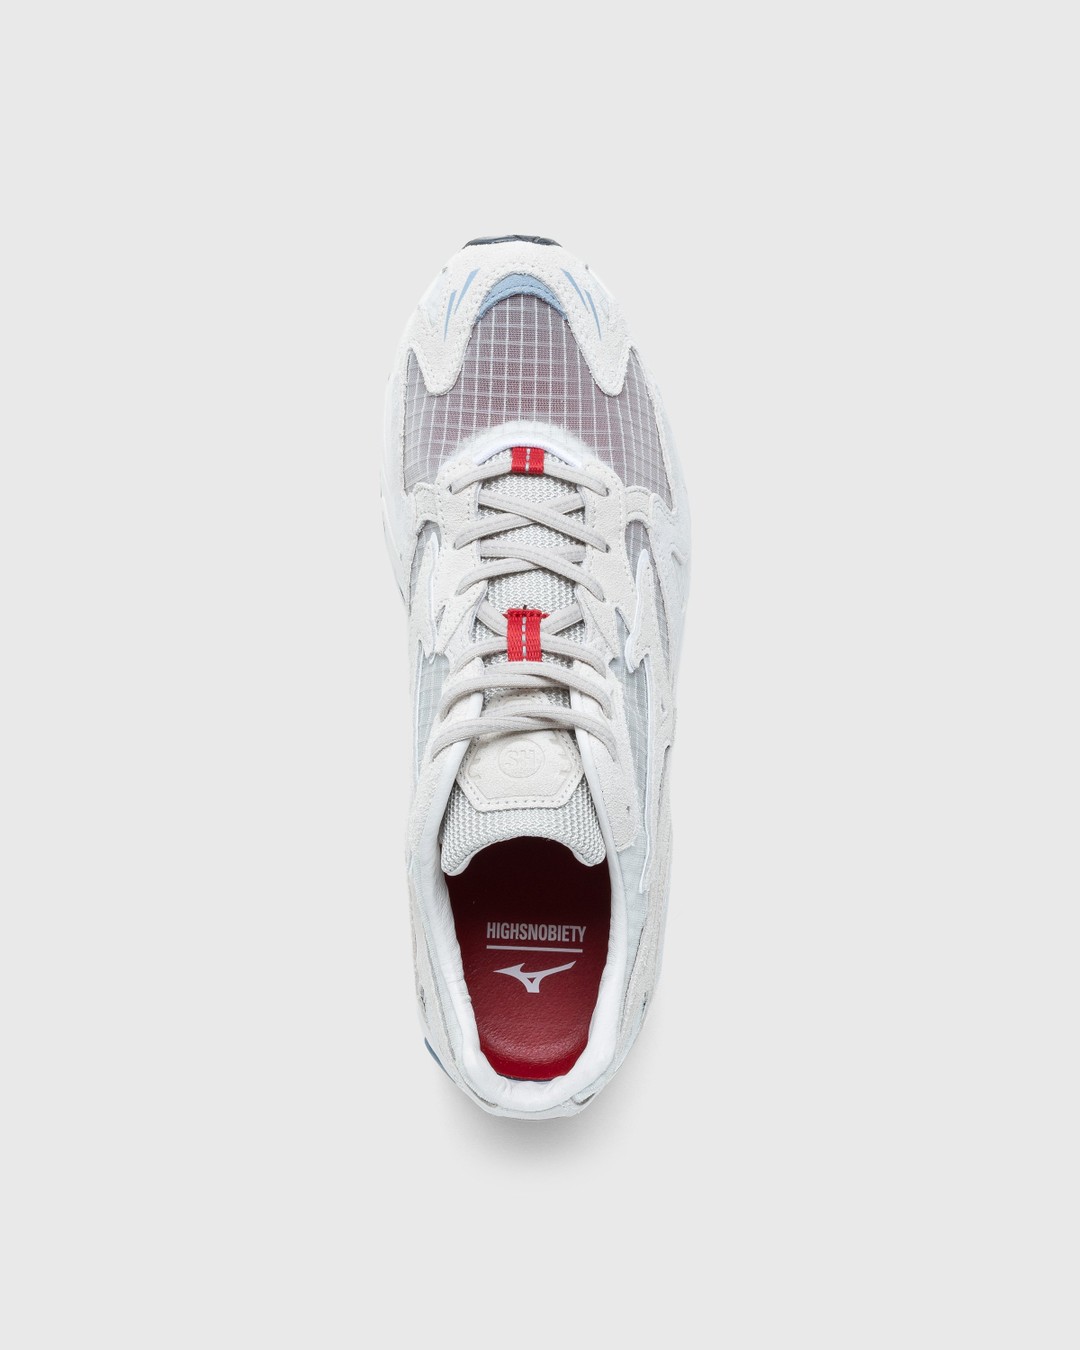 Mizuno x Highsnobiety – Wave Rider 10 White/Red - Low Top Sneakers - Grey - Image 5